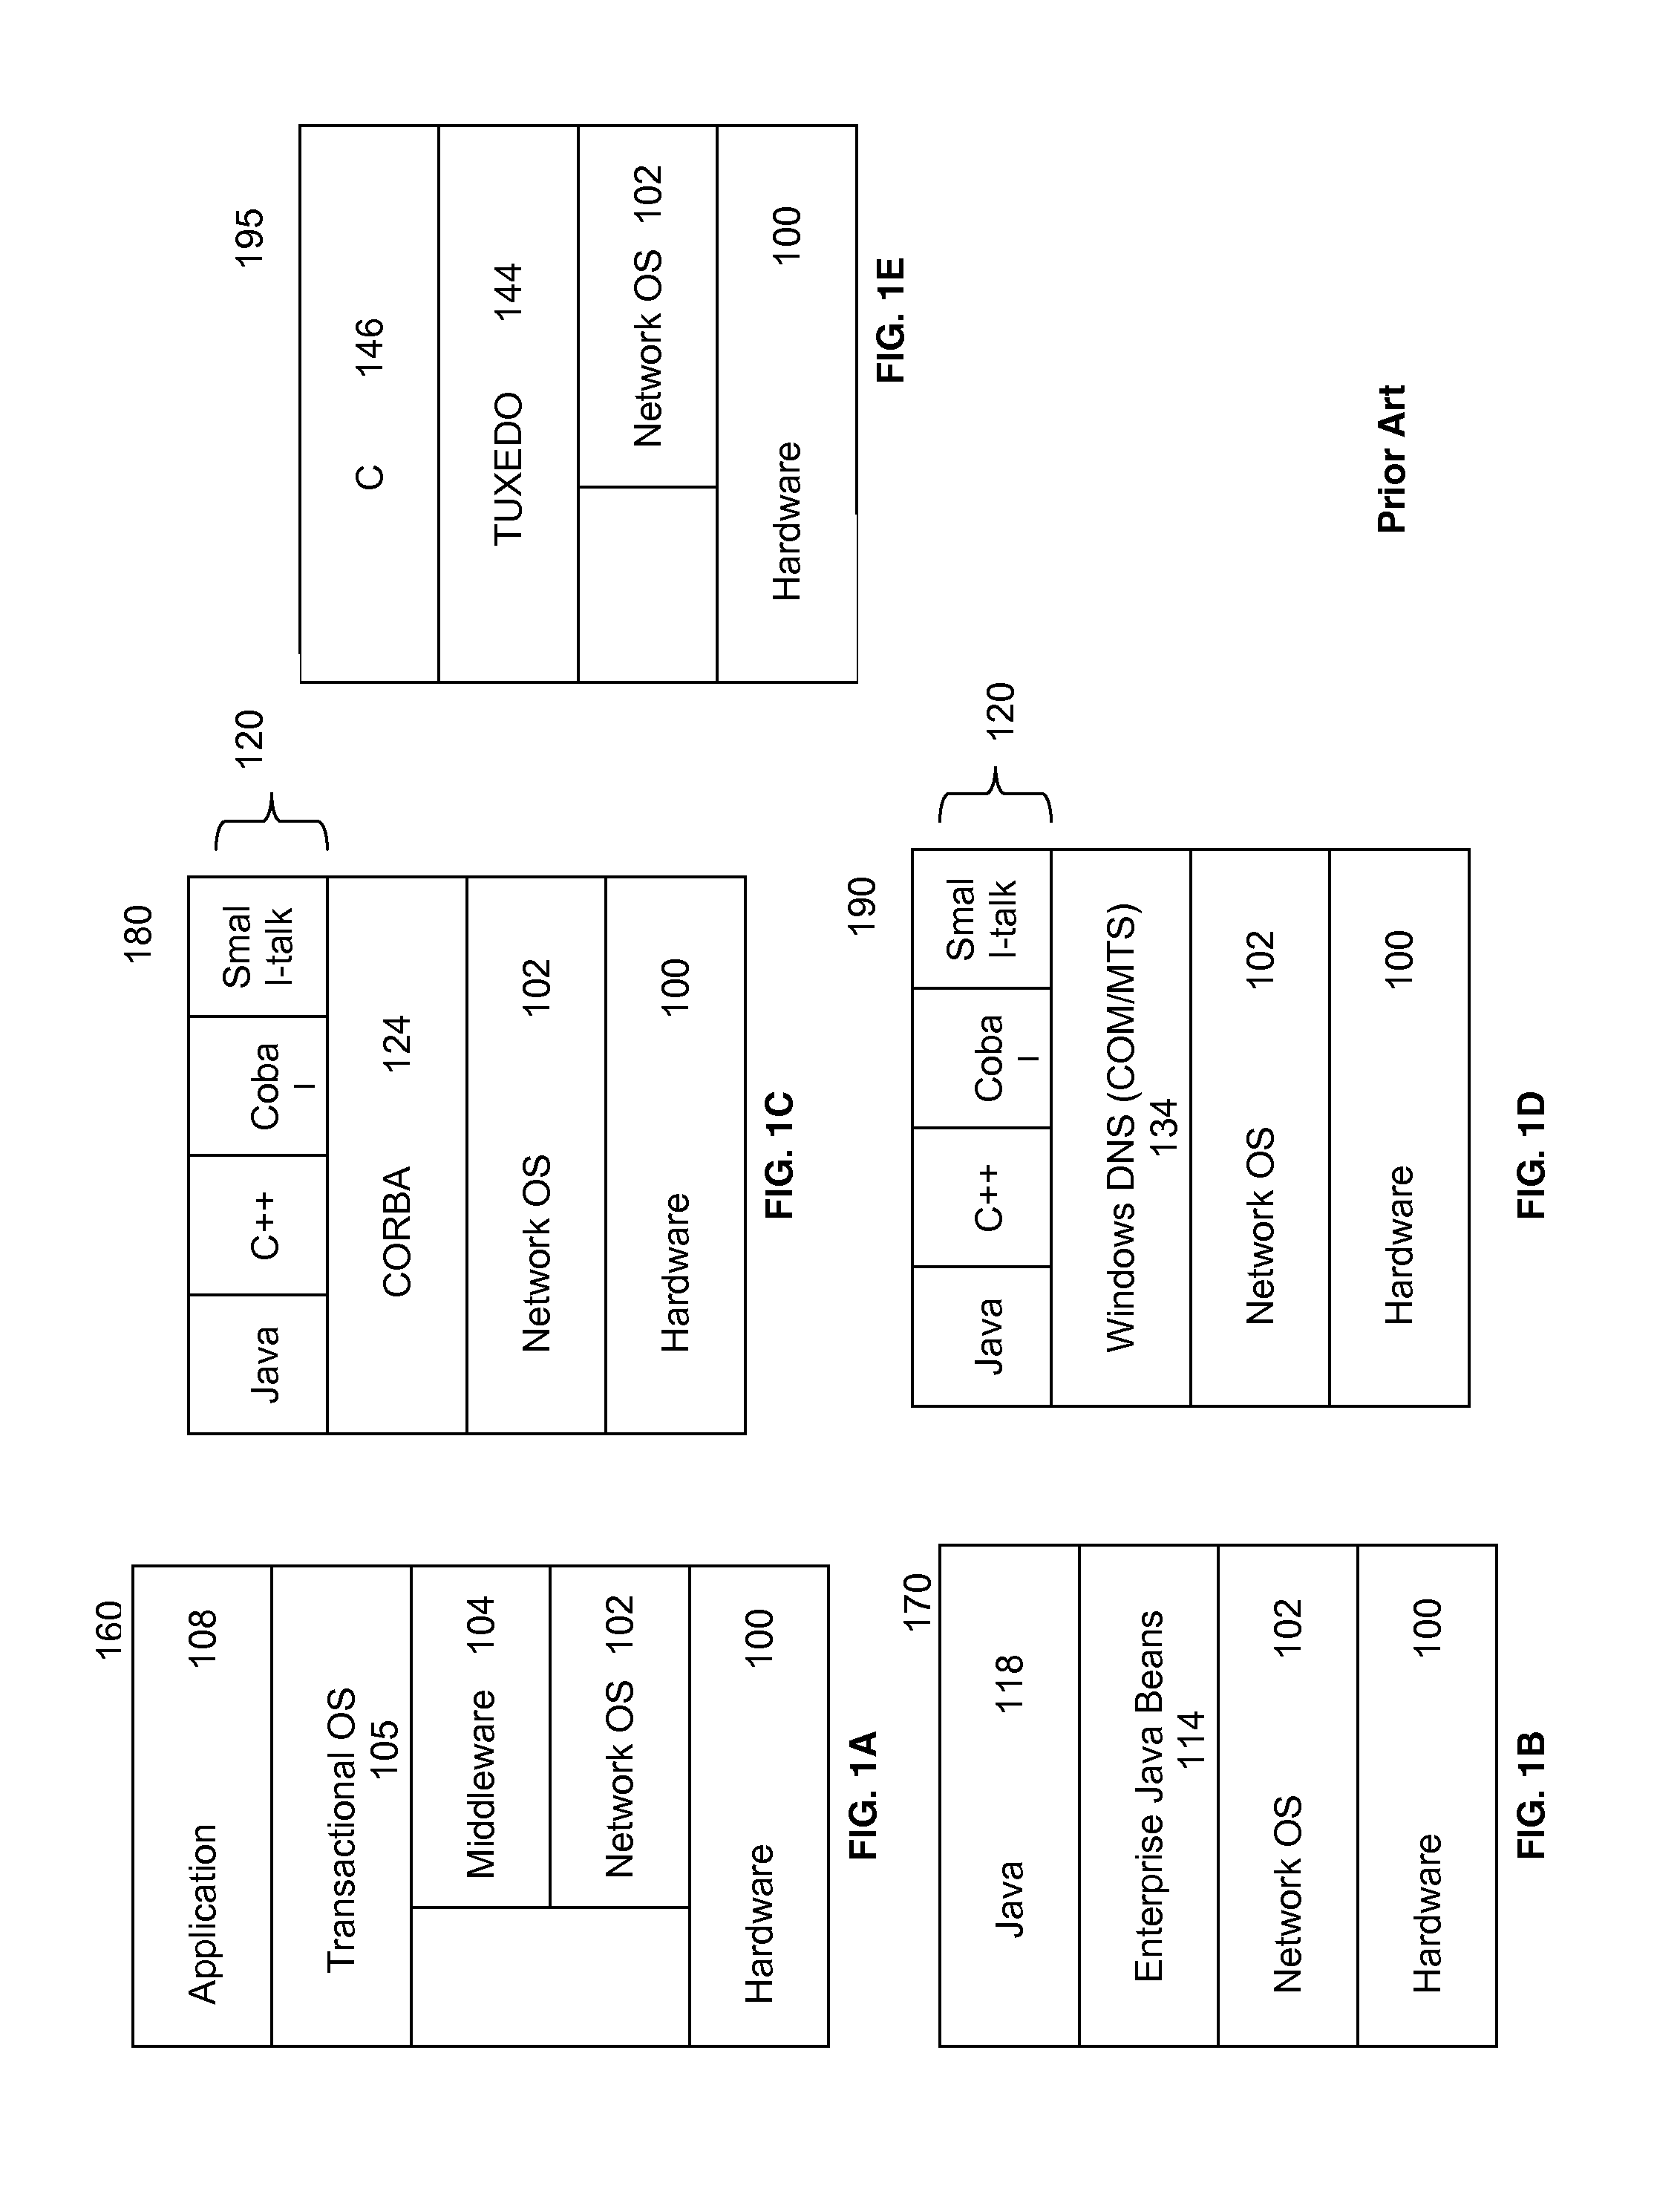 System and method for distributing assets to multi-tiered network nodes